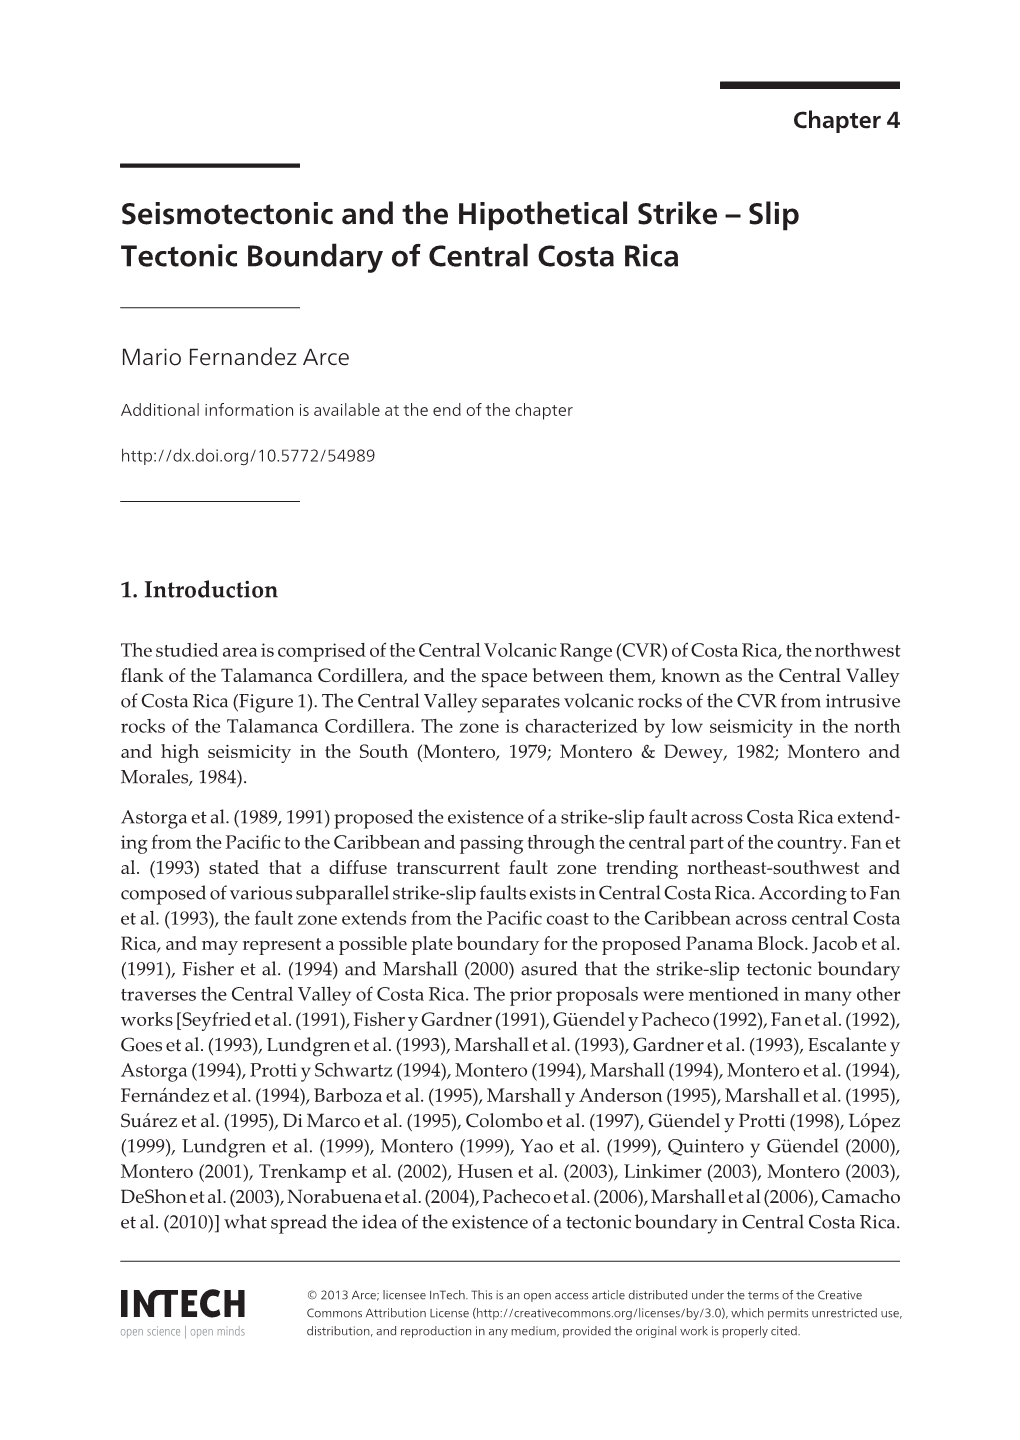 Seismotectonic and the Hipothetical Strike – Slip Tectonic Boundary of Central Costa Rica